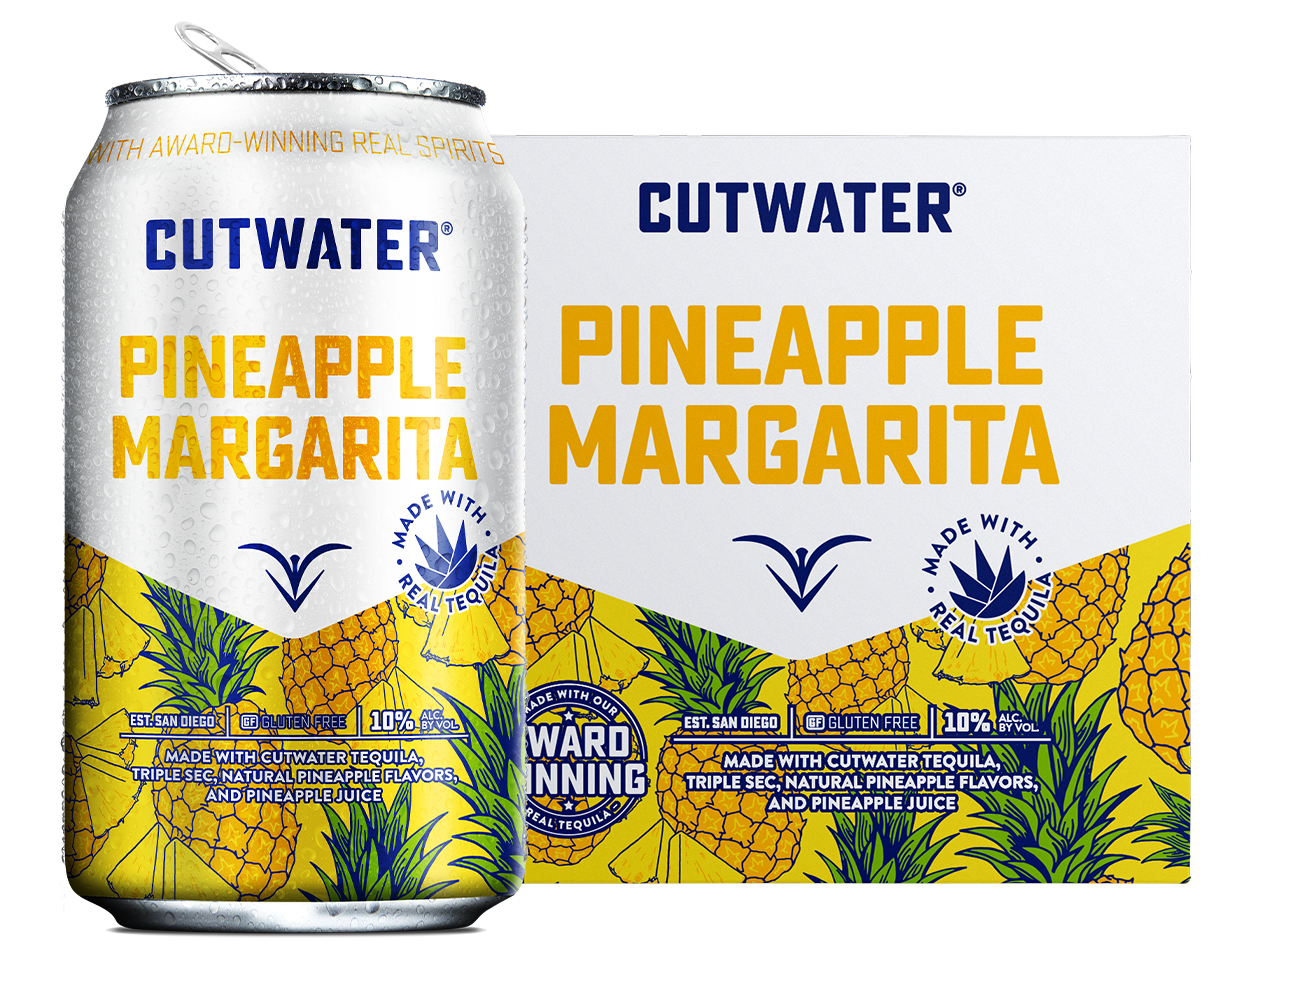 Cutwater Cutwater Pineapple Margarita Ready-to-drink - 4 Pack 12oz Cans